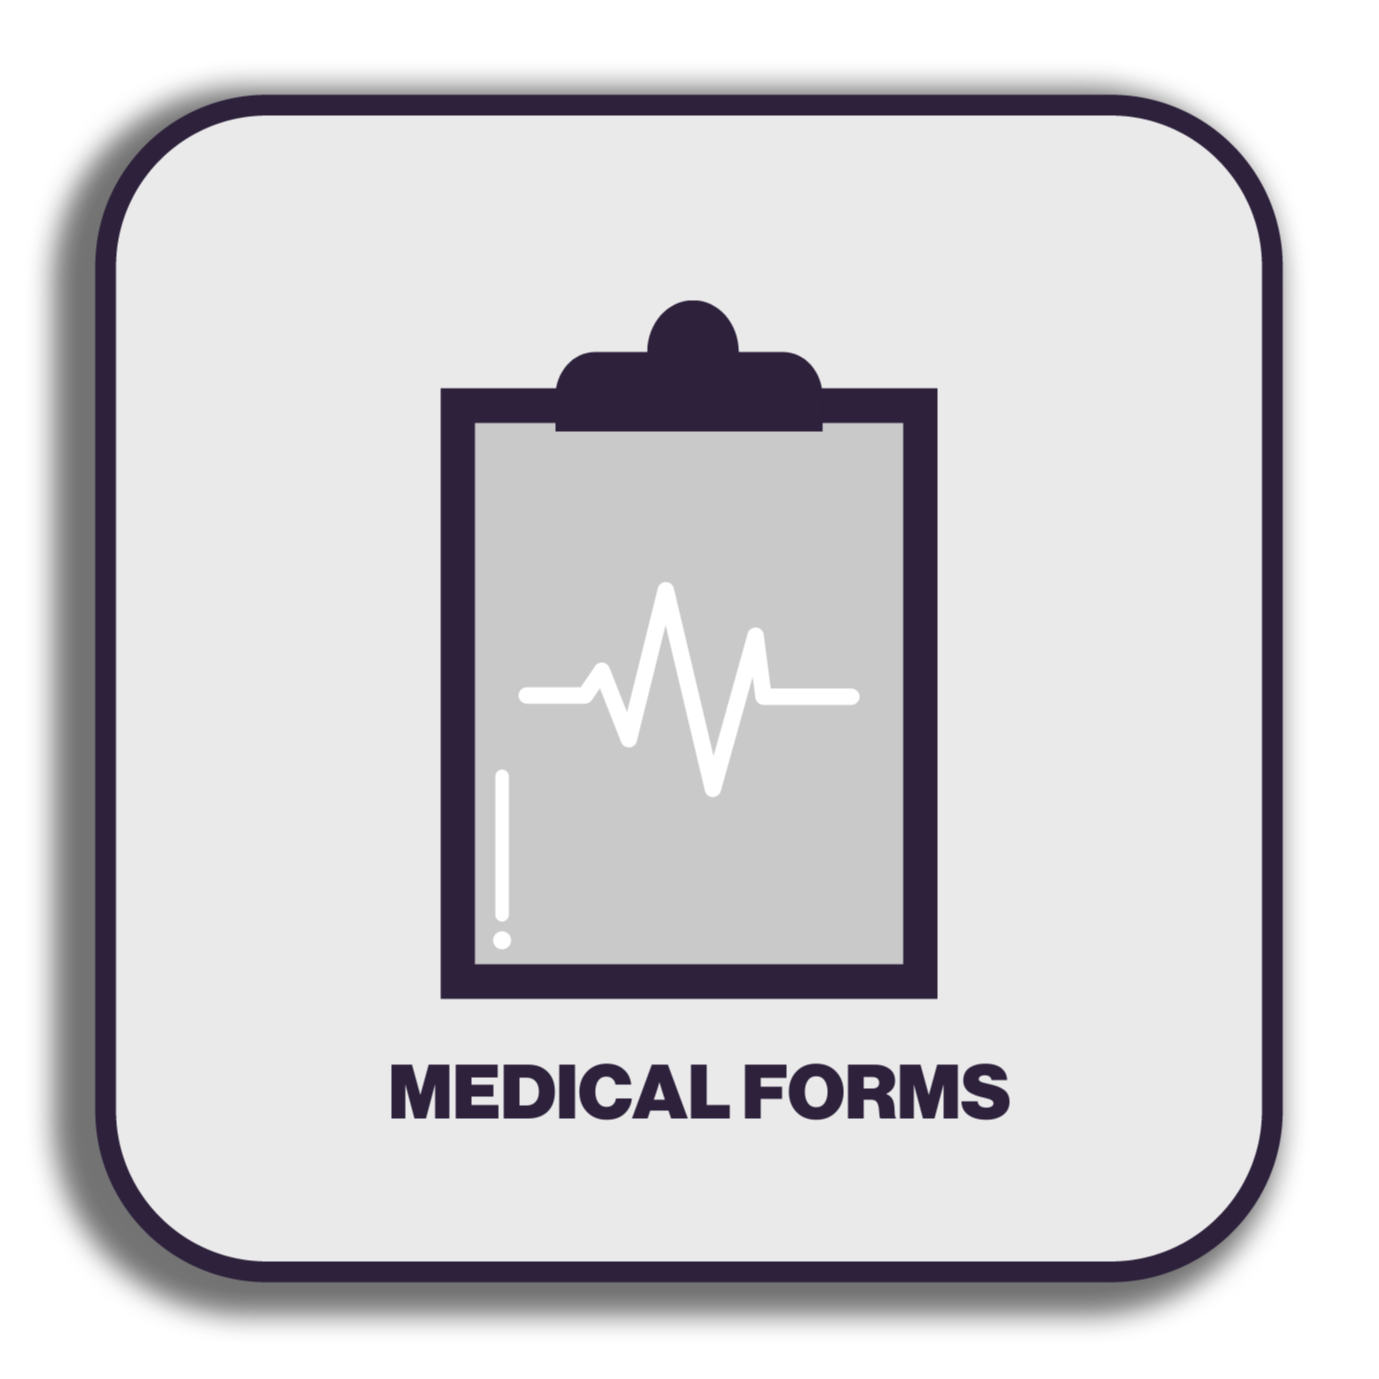 medical forms